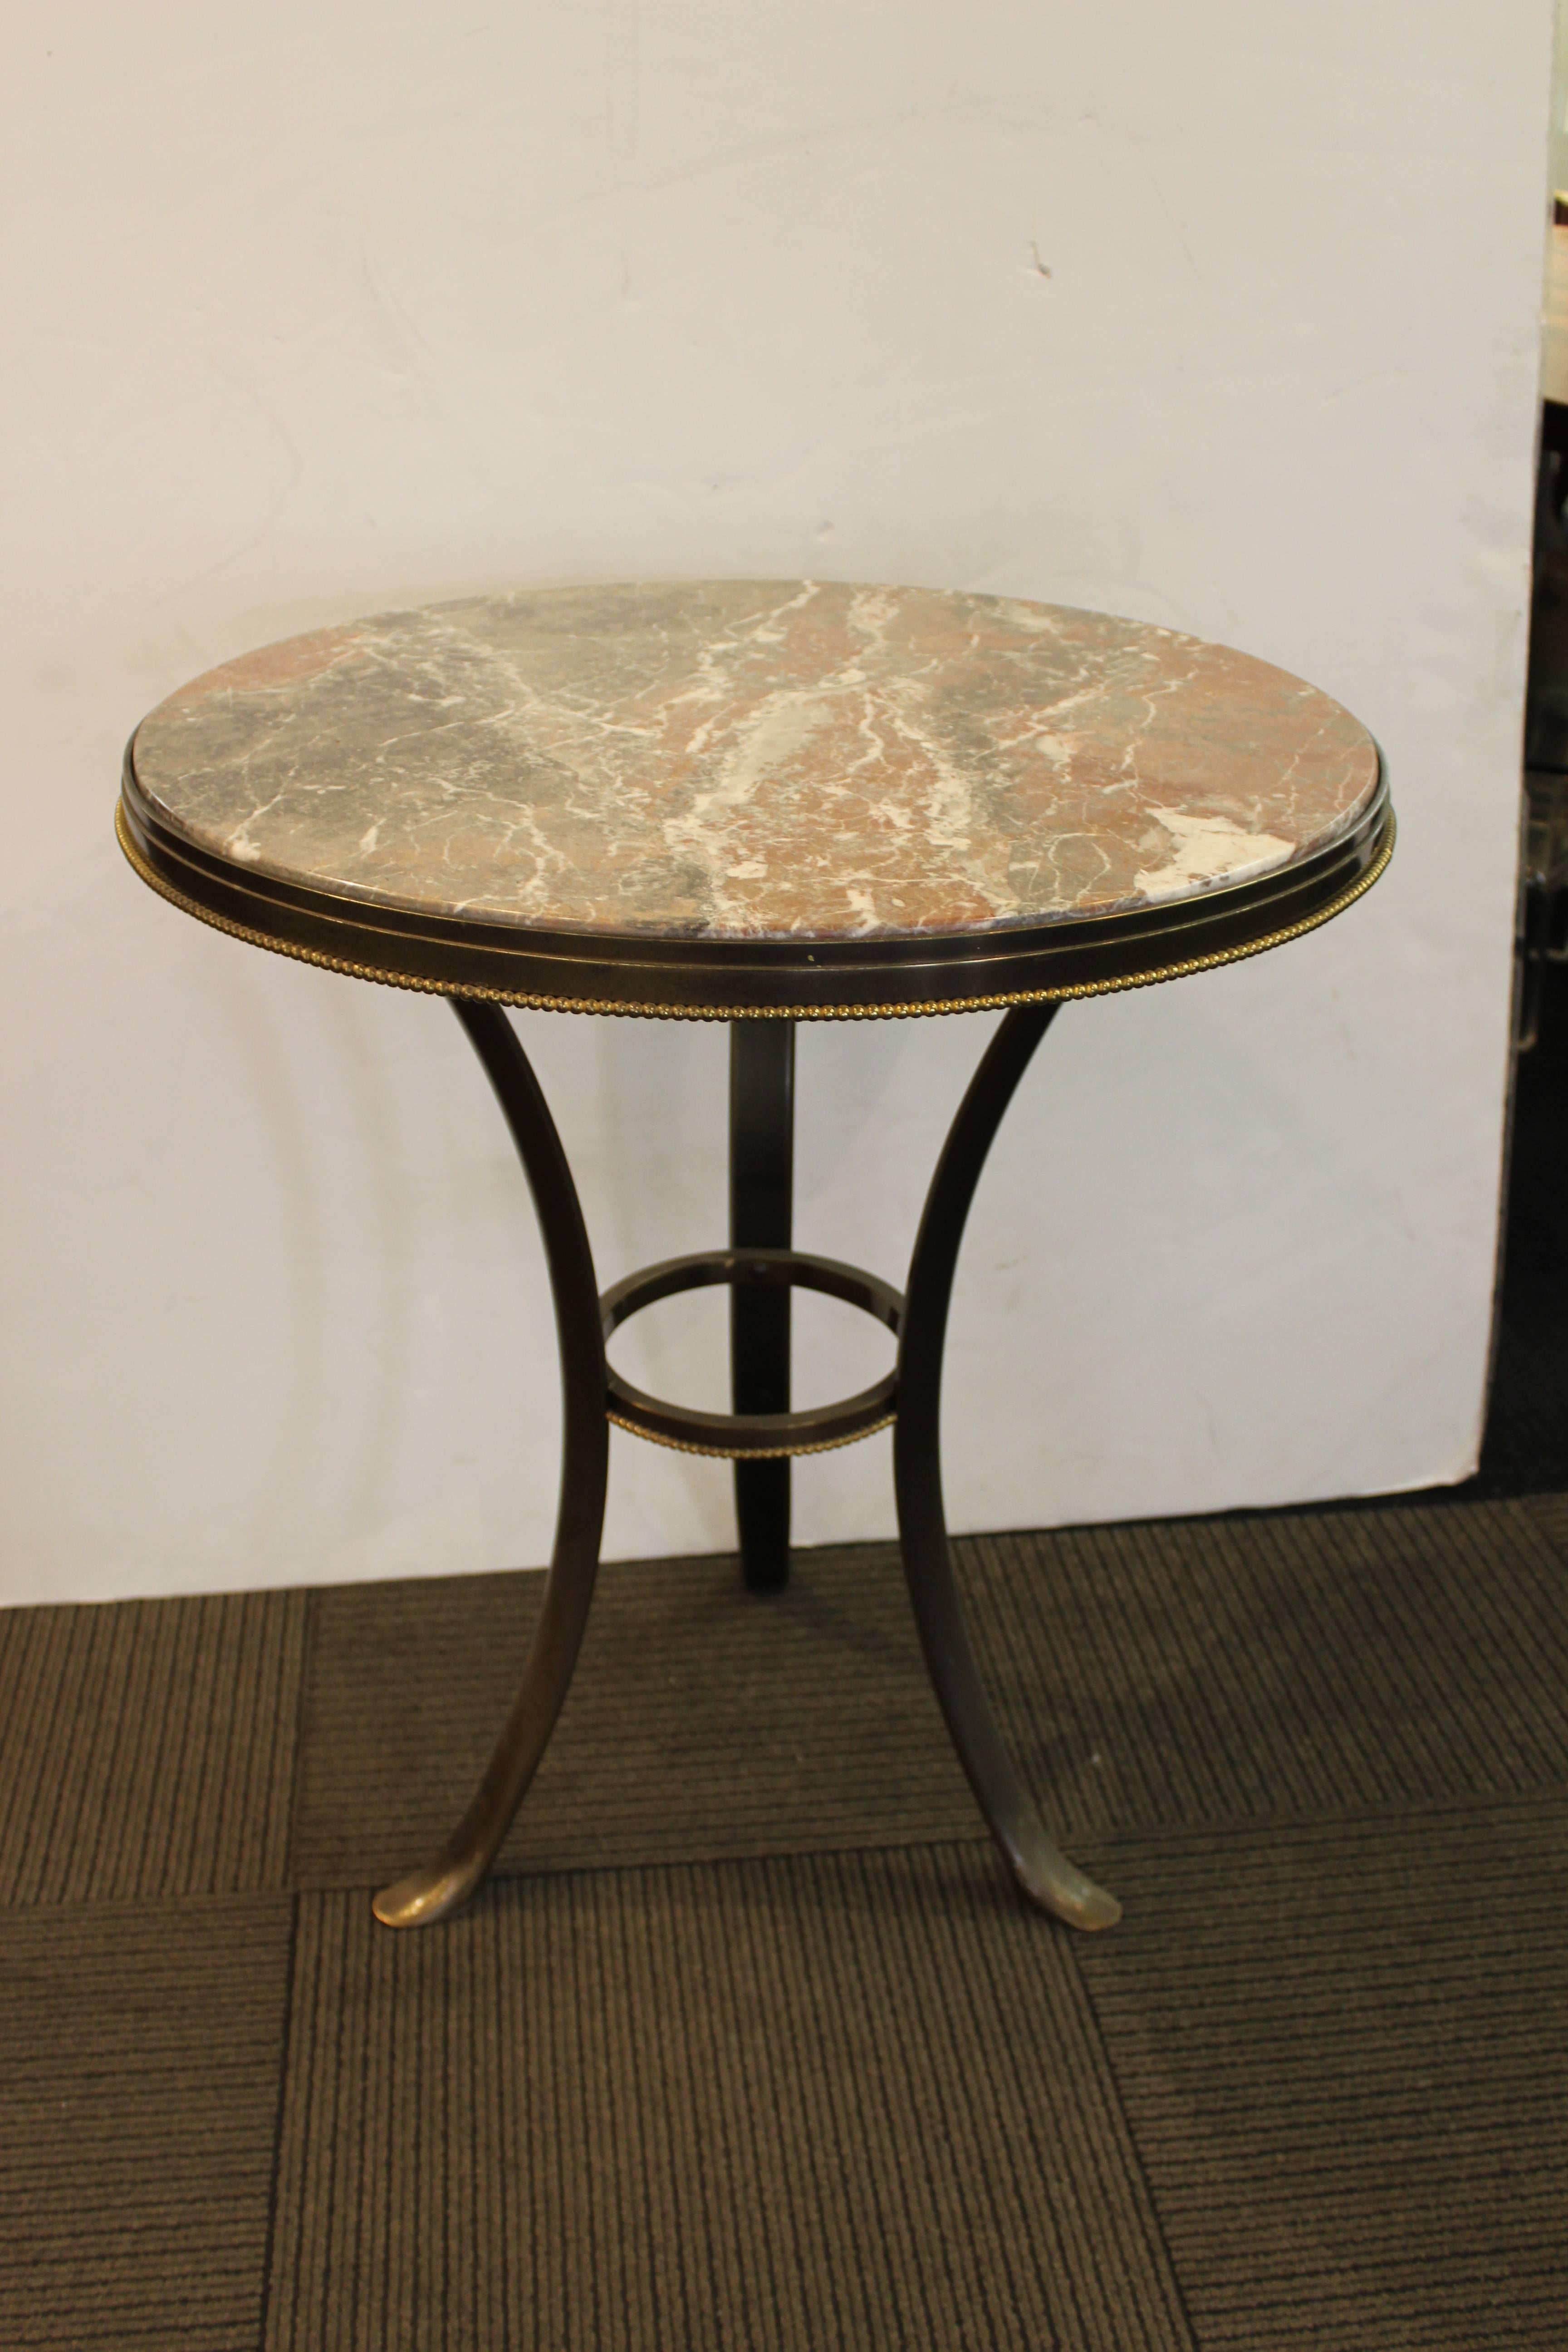 Gueridon table on three gently curved legs crafted in patinated bronze with a round marble top. Includes a decorative ring in between the table legs with gilt bronze 'beads' that mimic the pattern around the tabletop. Wear to brass finish on legs.